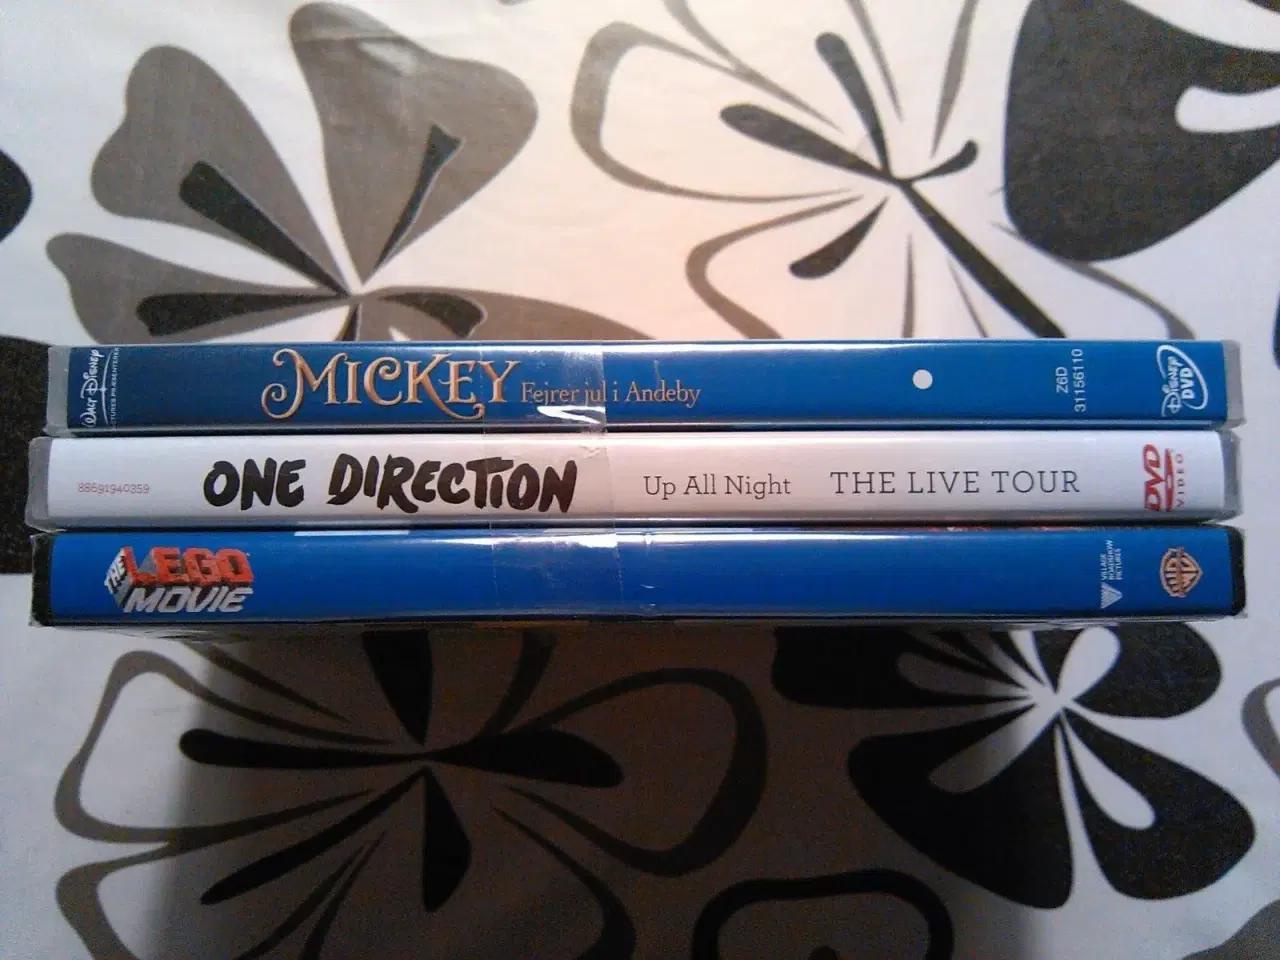 Billede 3 - LEGO The Movie, One Direction, Mickey